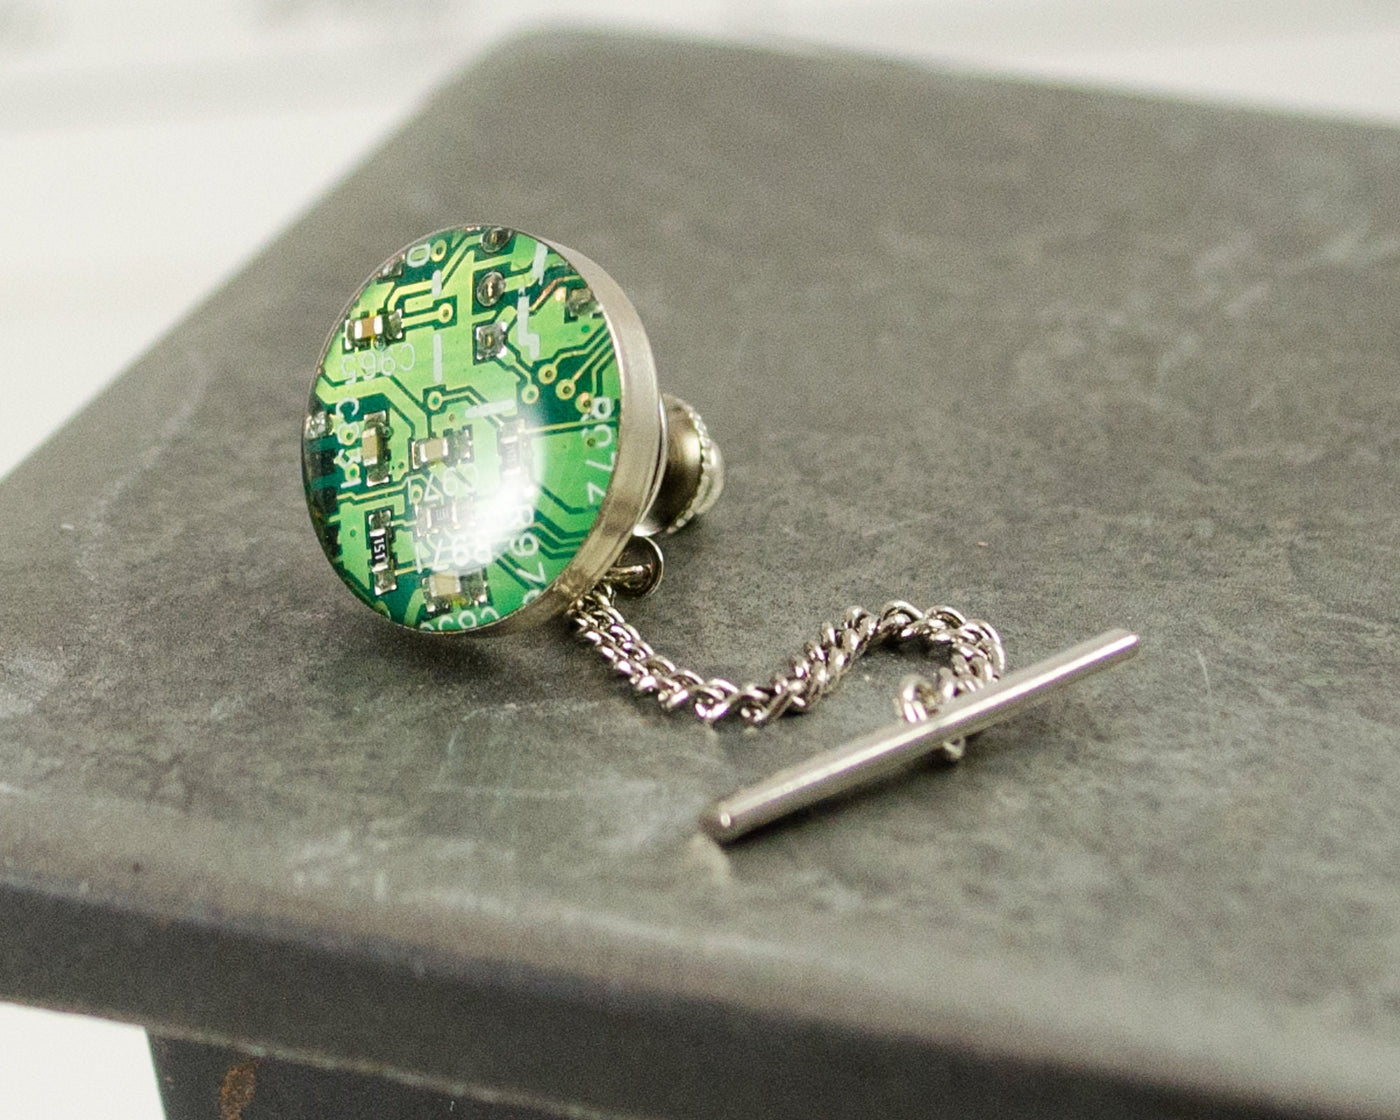 Green Circuit Board Tie Tack, Nerdy Computer Jewelry, Circuit Board Jewelry, Tech Gift, Upcycled, Wearable Technology, Fathers Day Gift